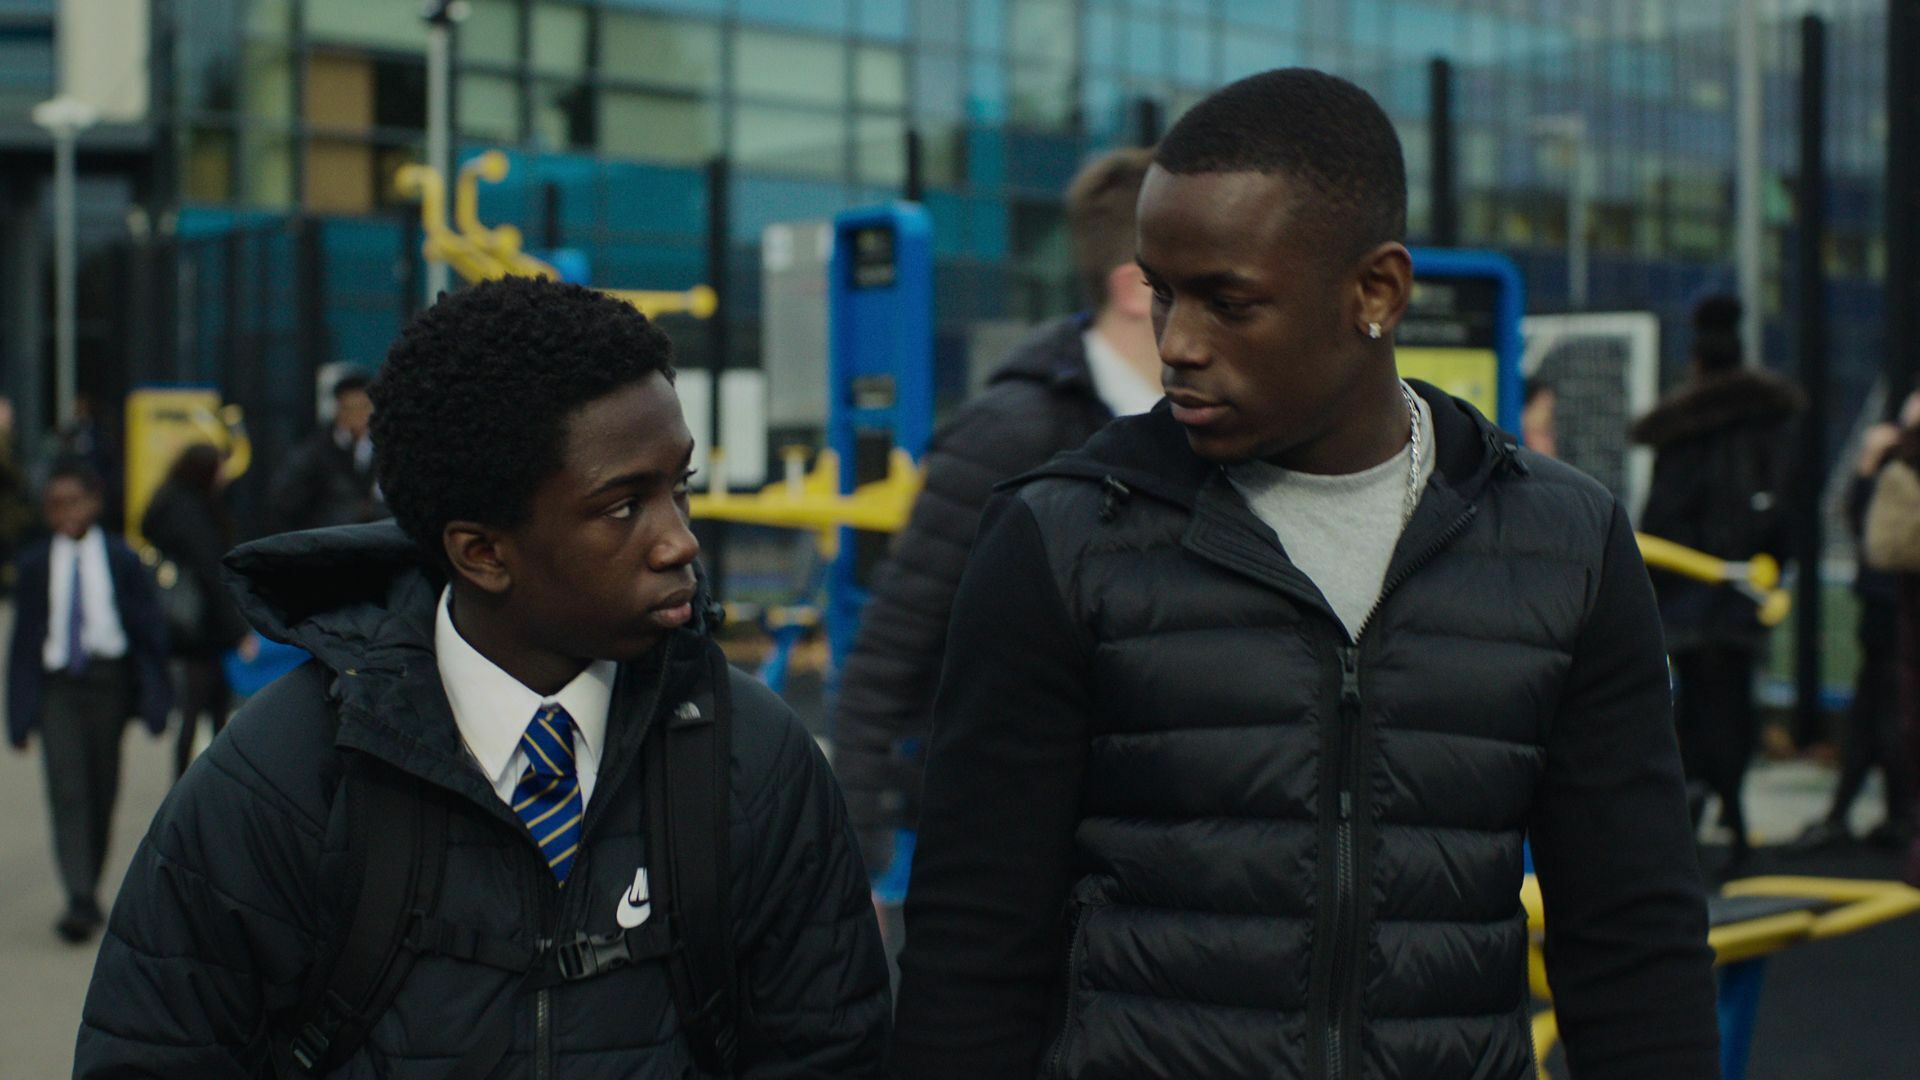 A Black boy in a school uniform looks at another young Black man, from "Top Boy"